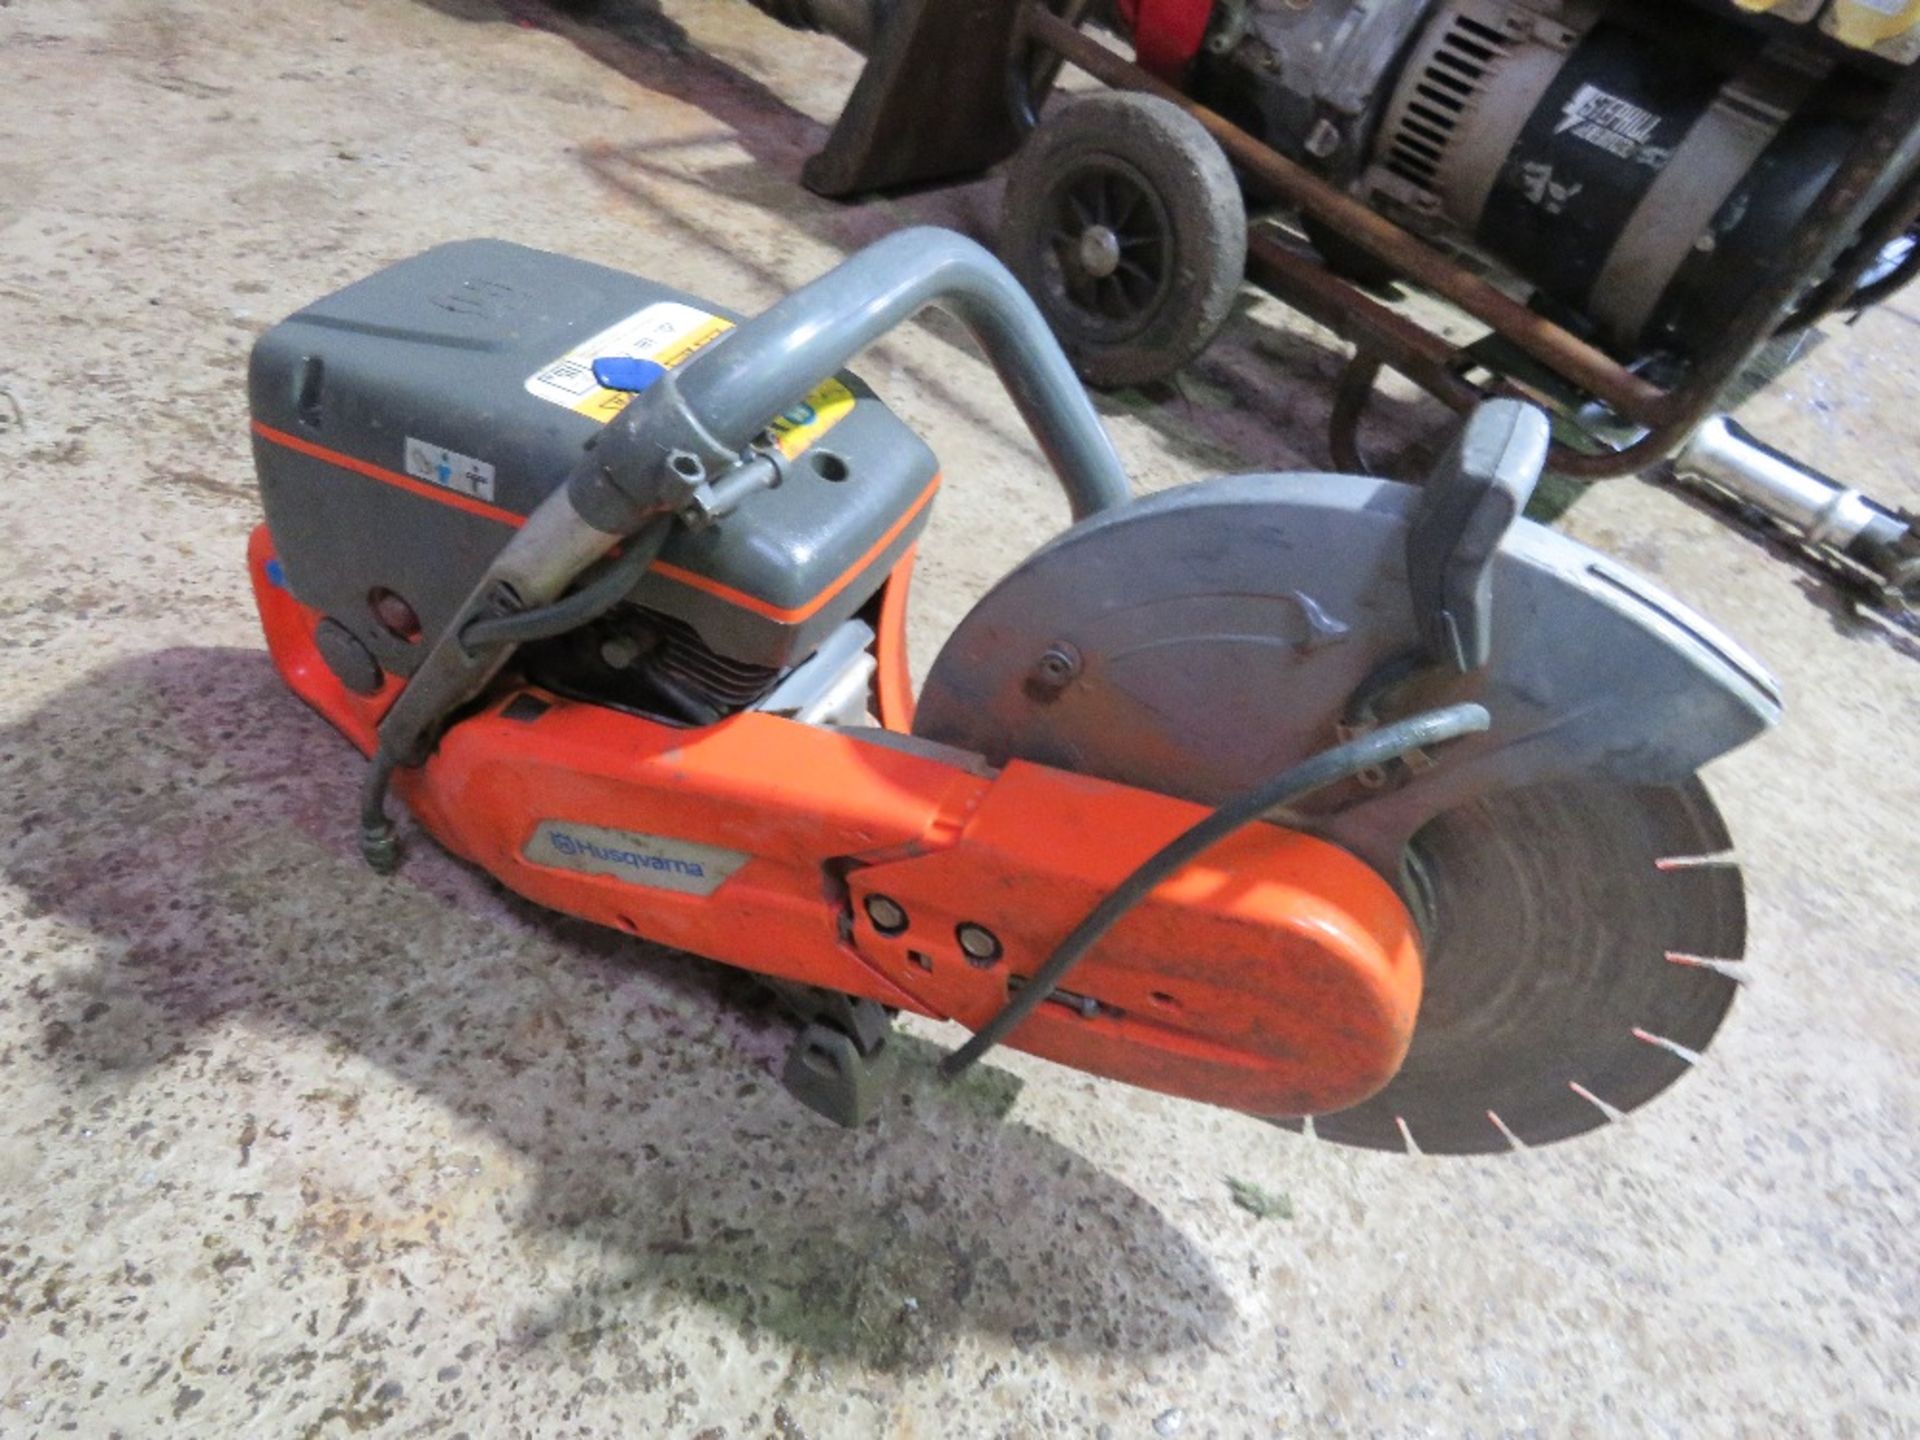 HUSQVARNA K760 PETROL ENGINED CUT OFF SAW WITH A BLADE. THIS LOT IS SOLD UNDER THE AUCTIONEERS MA - Image 2 of 4